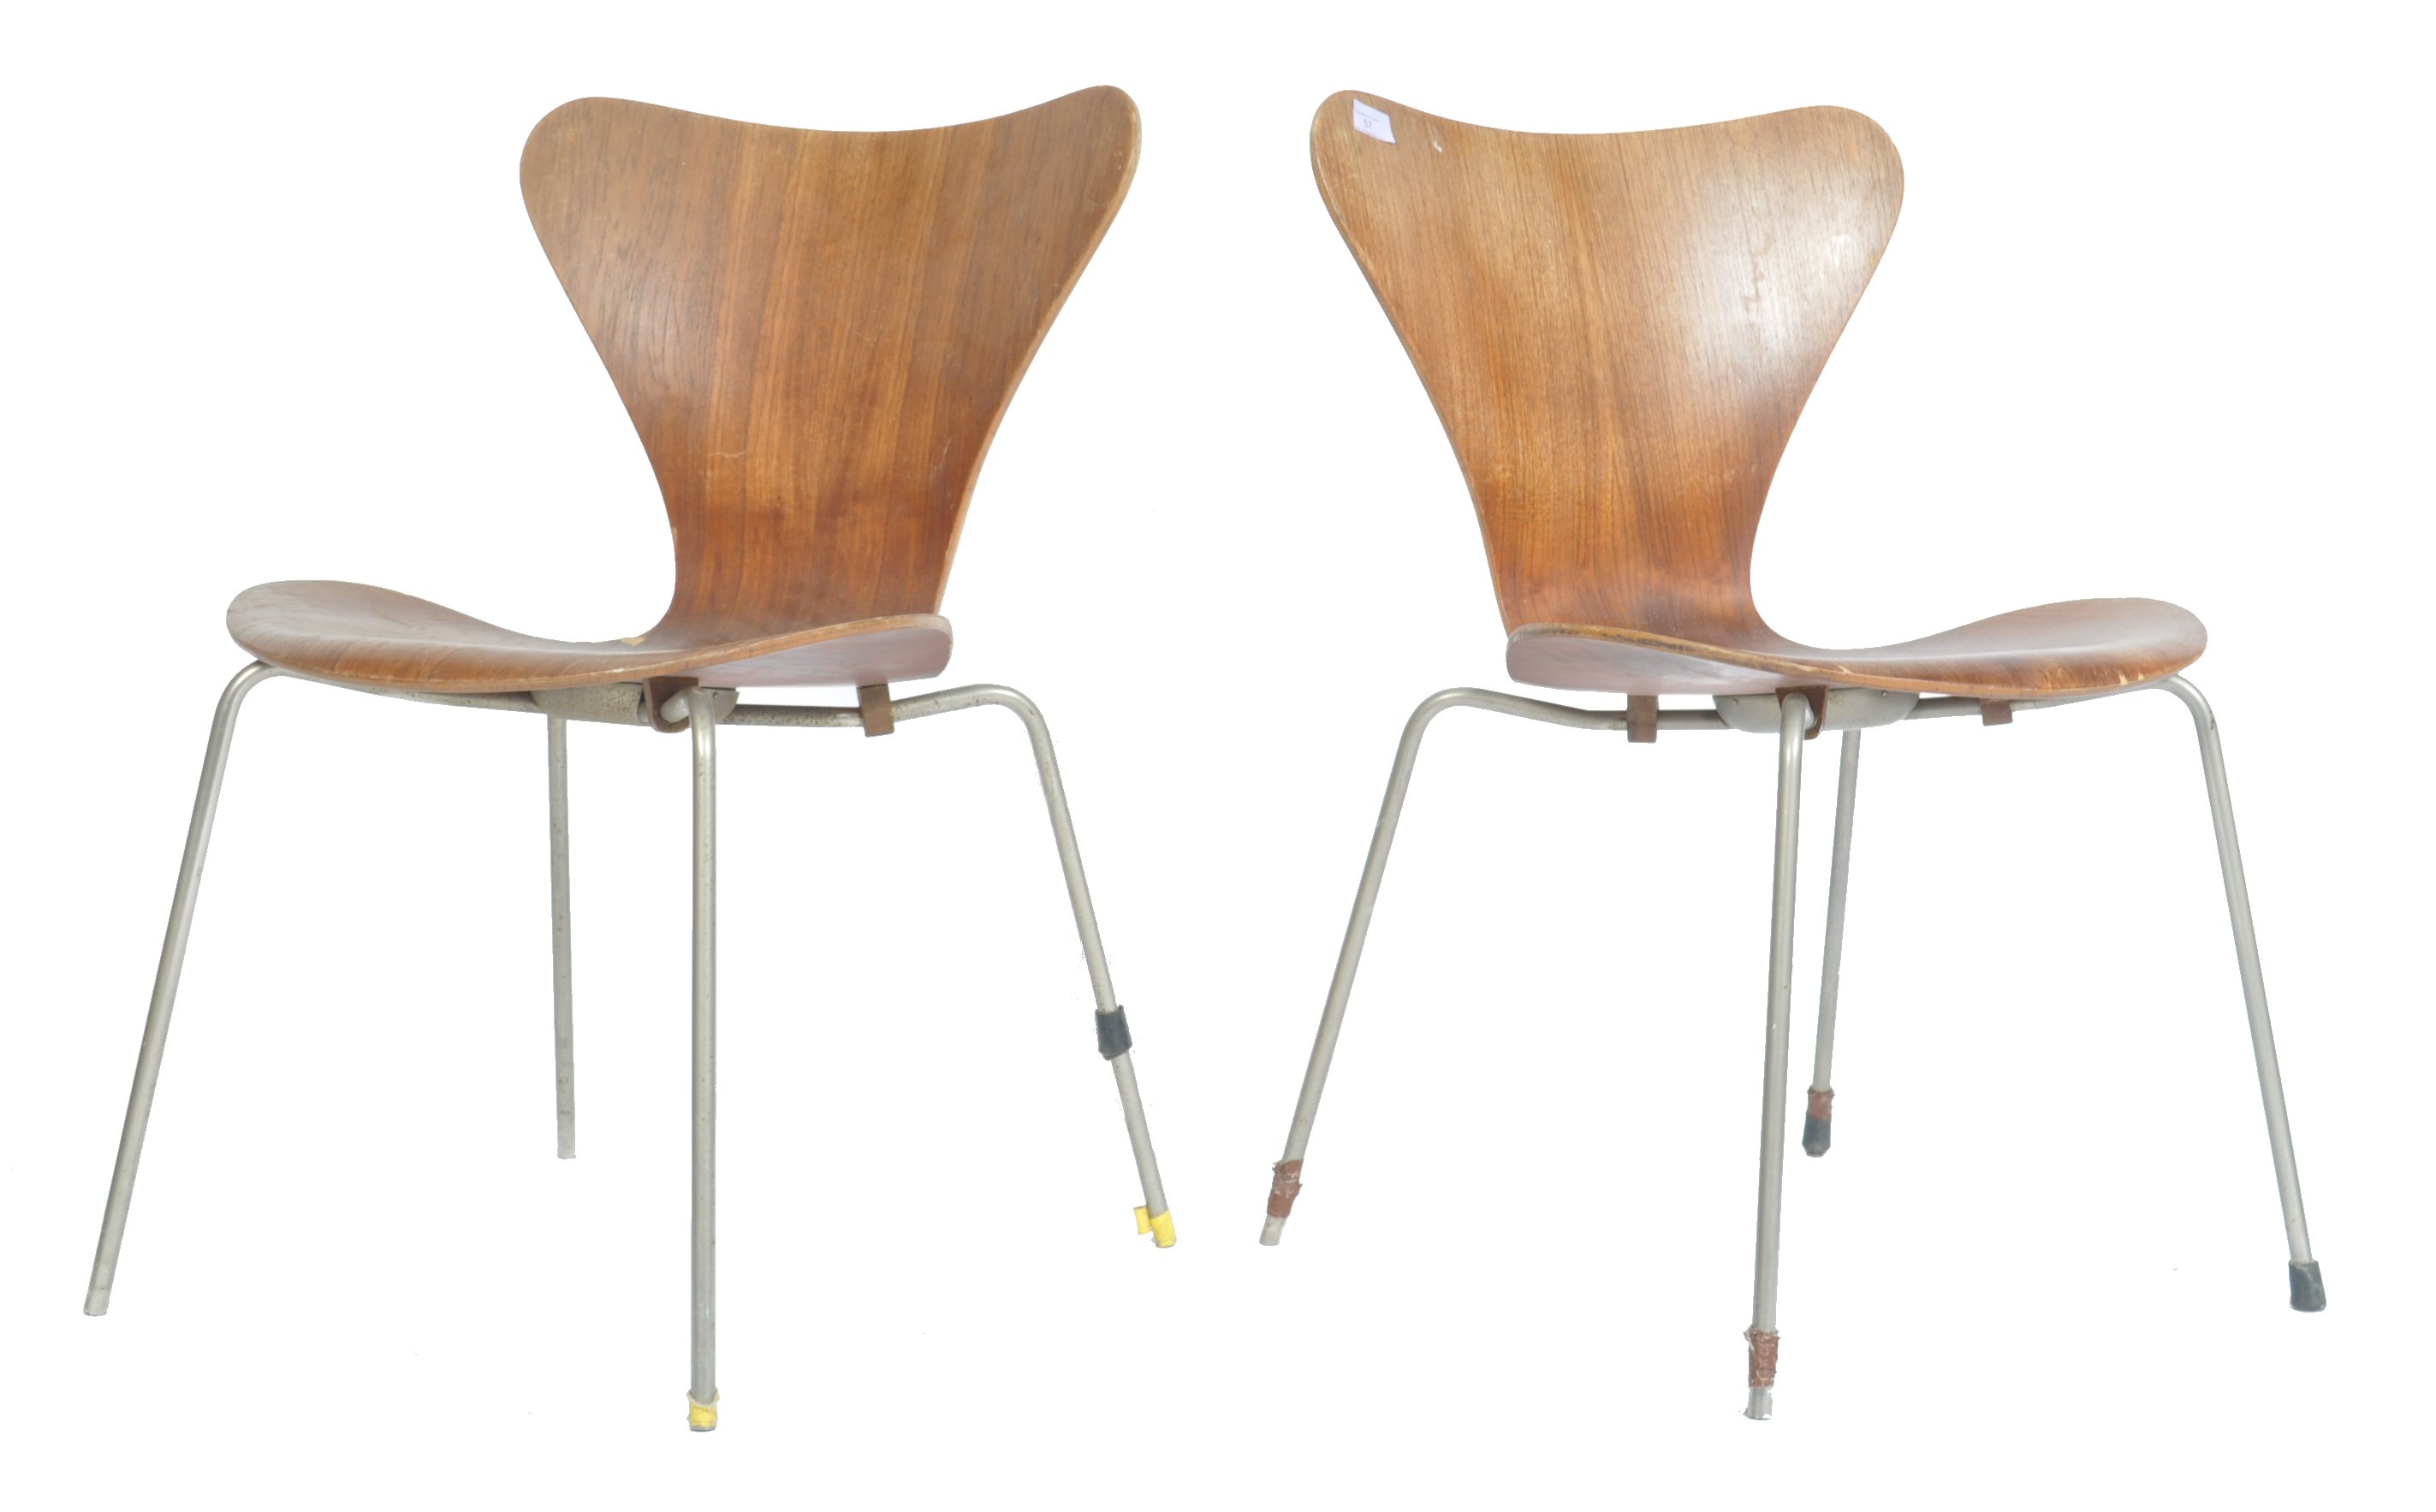 MODEL 3107 PAIR OF RETRO DINING CHAIRS BY ARNE JACOBSEN FOR FRITZ HANSEN